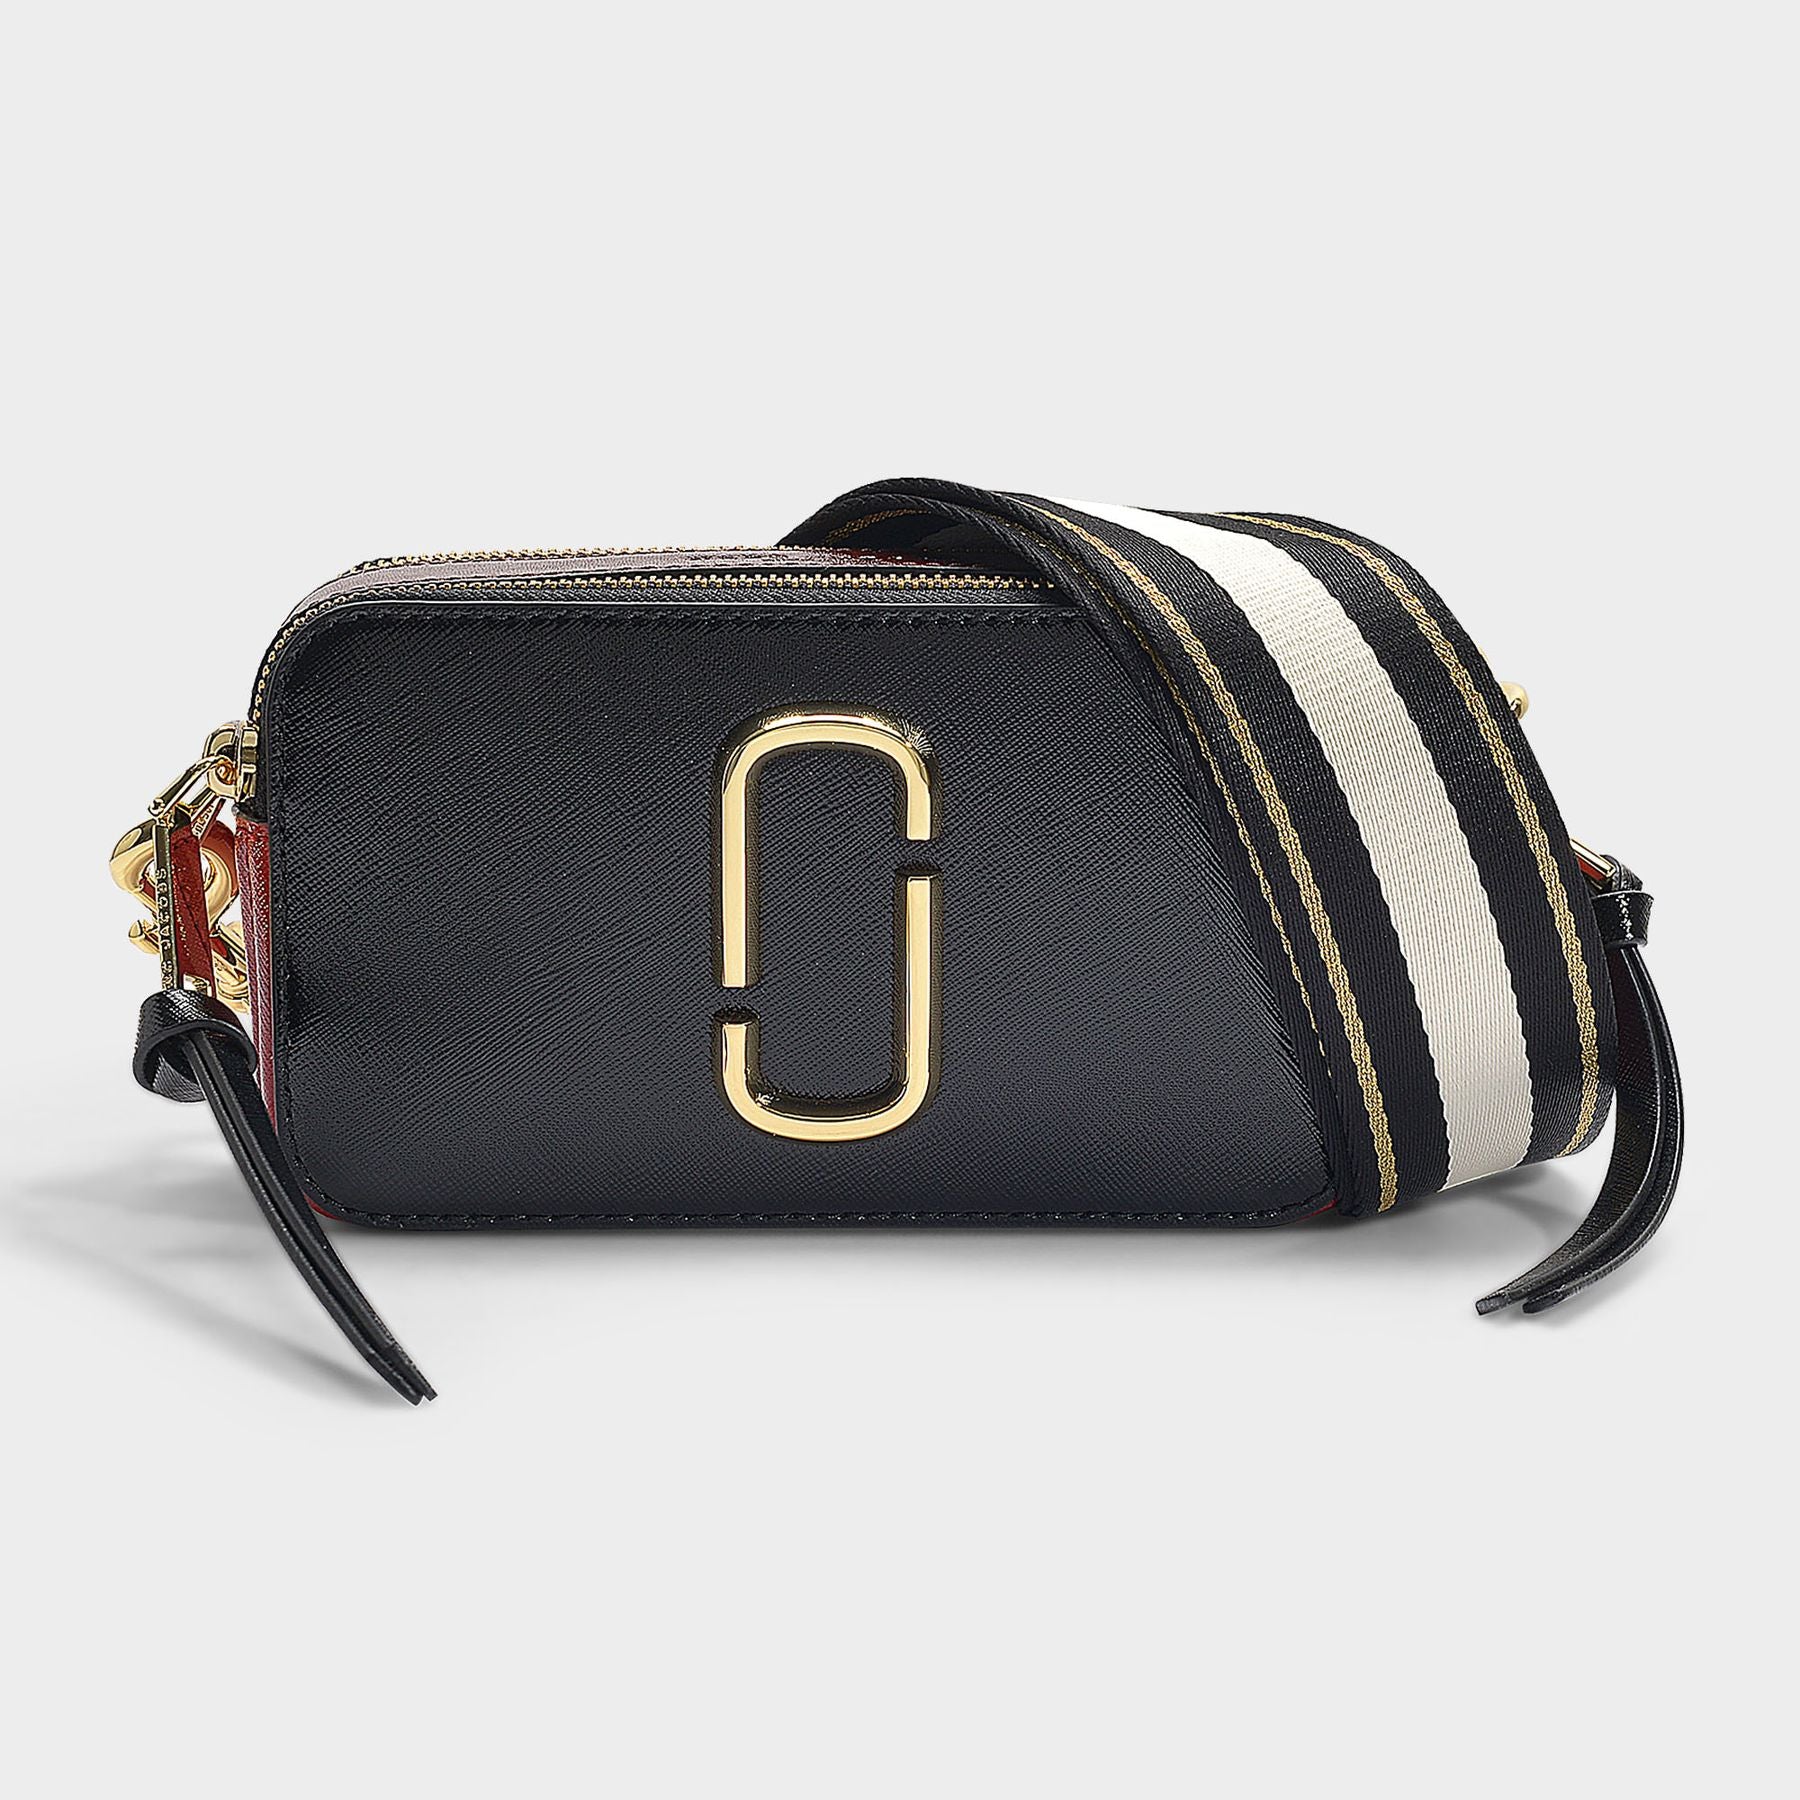 sac marc jacob bandouliere,Save up to 16%